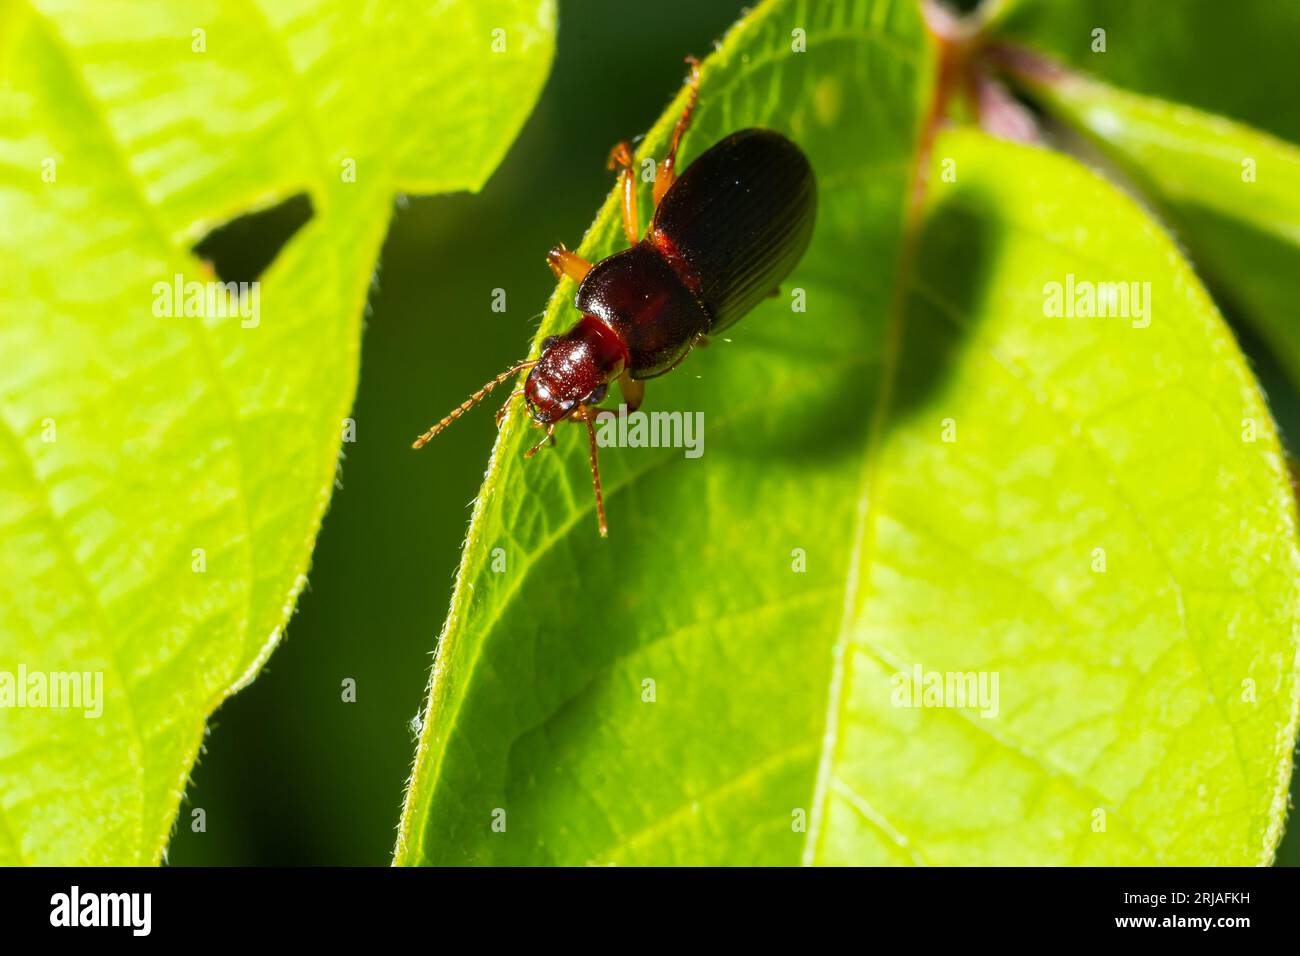 copper colored ground beetle on grass in a natural environment. summer, dream day. Stock Photo